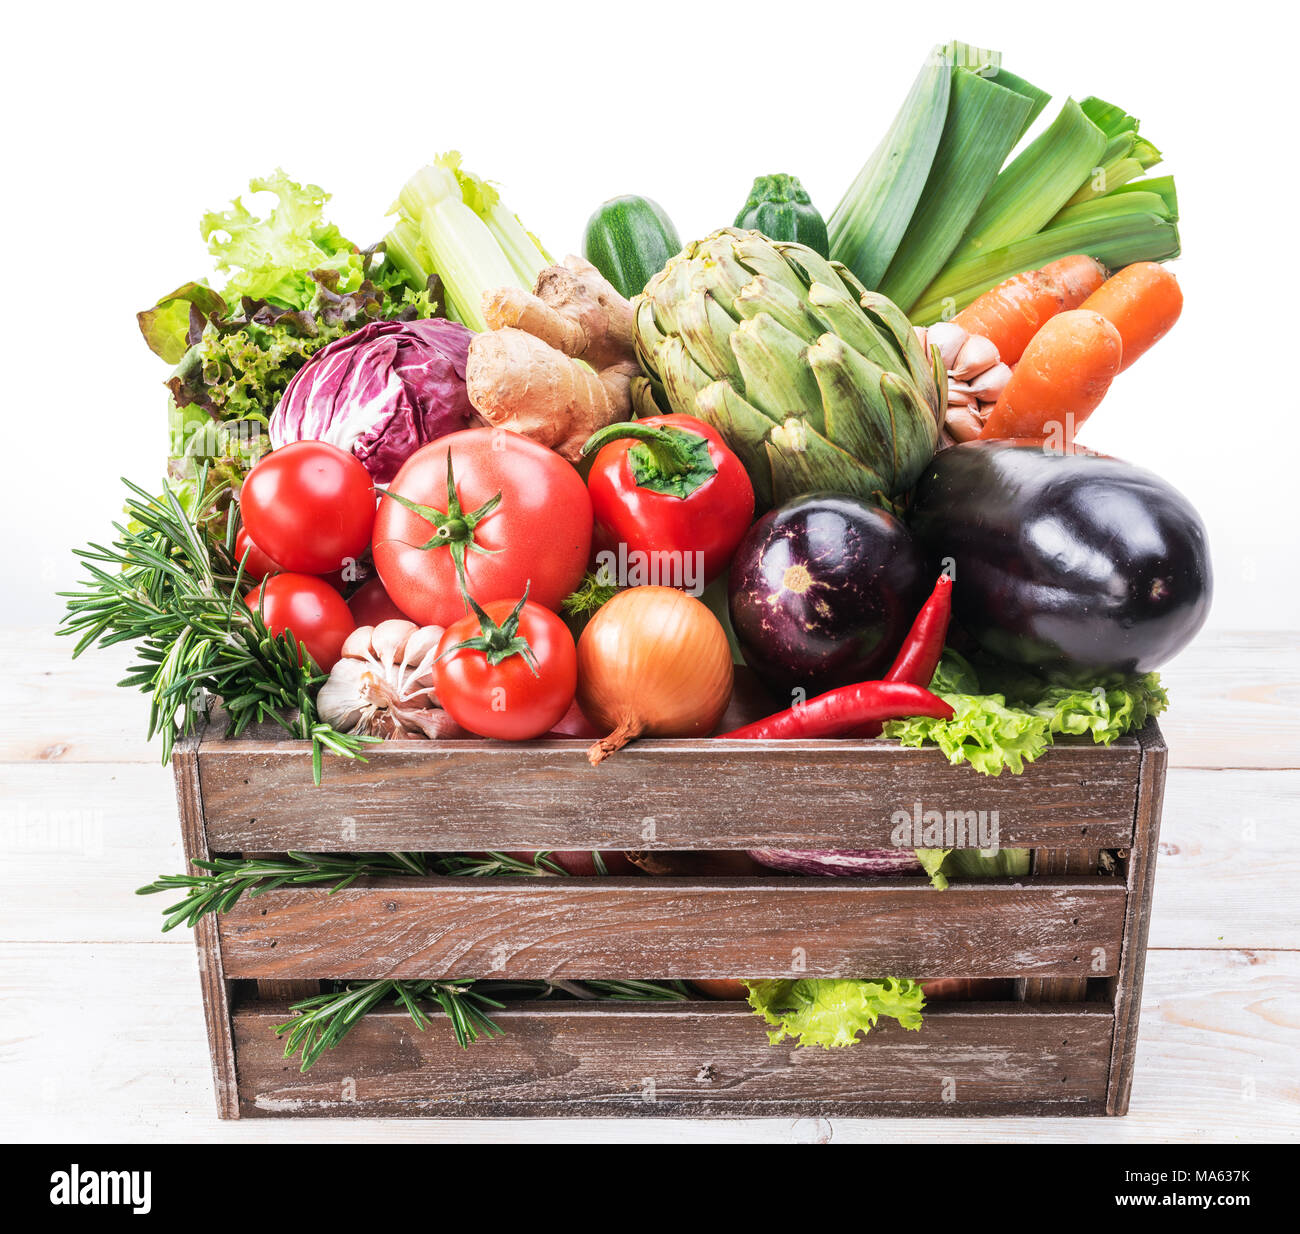 Fresh multi-colored vegetables in wooden crate. White background. Stock Photo